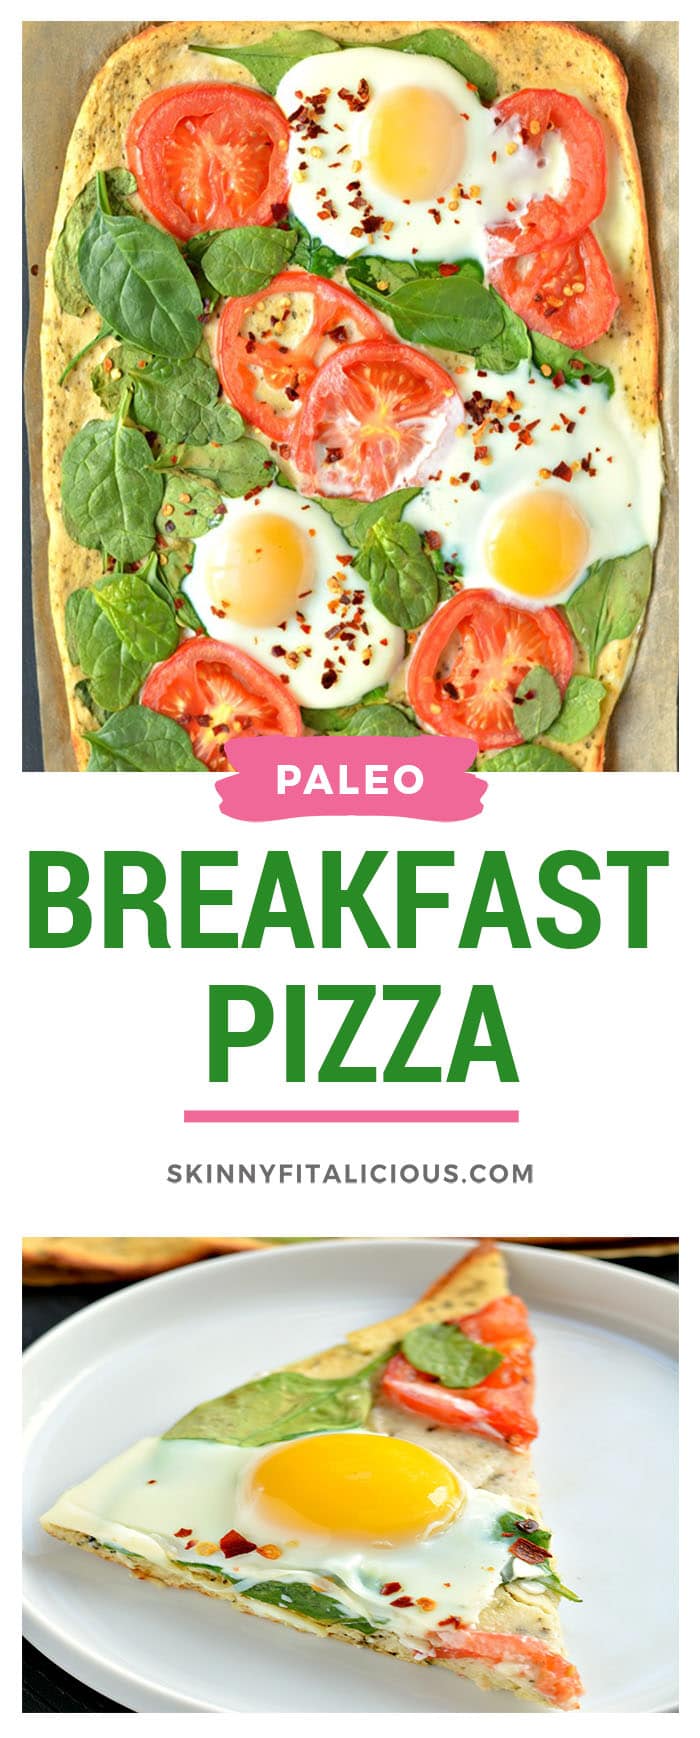 Wake up to Paleo Breakfast Pizza! Made with a simple coconut egg crust and topped with fresh veggies and cracked eggs, this is a perfect, easy meal for any time of day! Paleo + Gluten Free